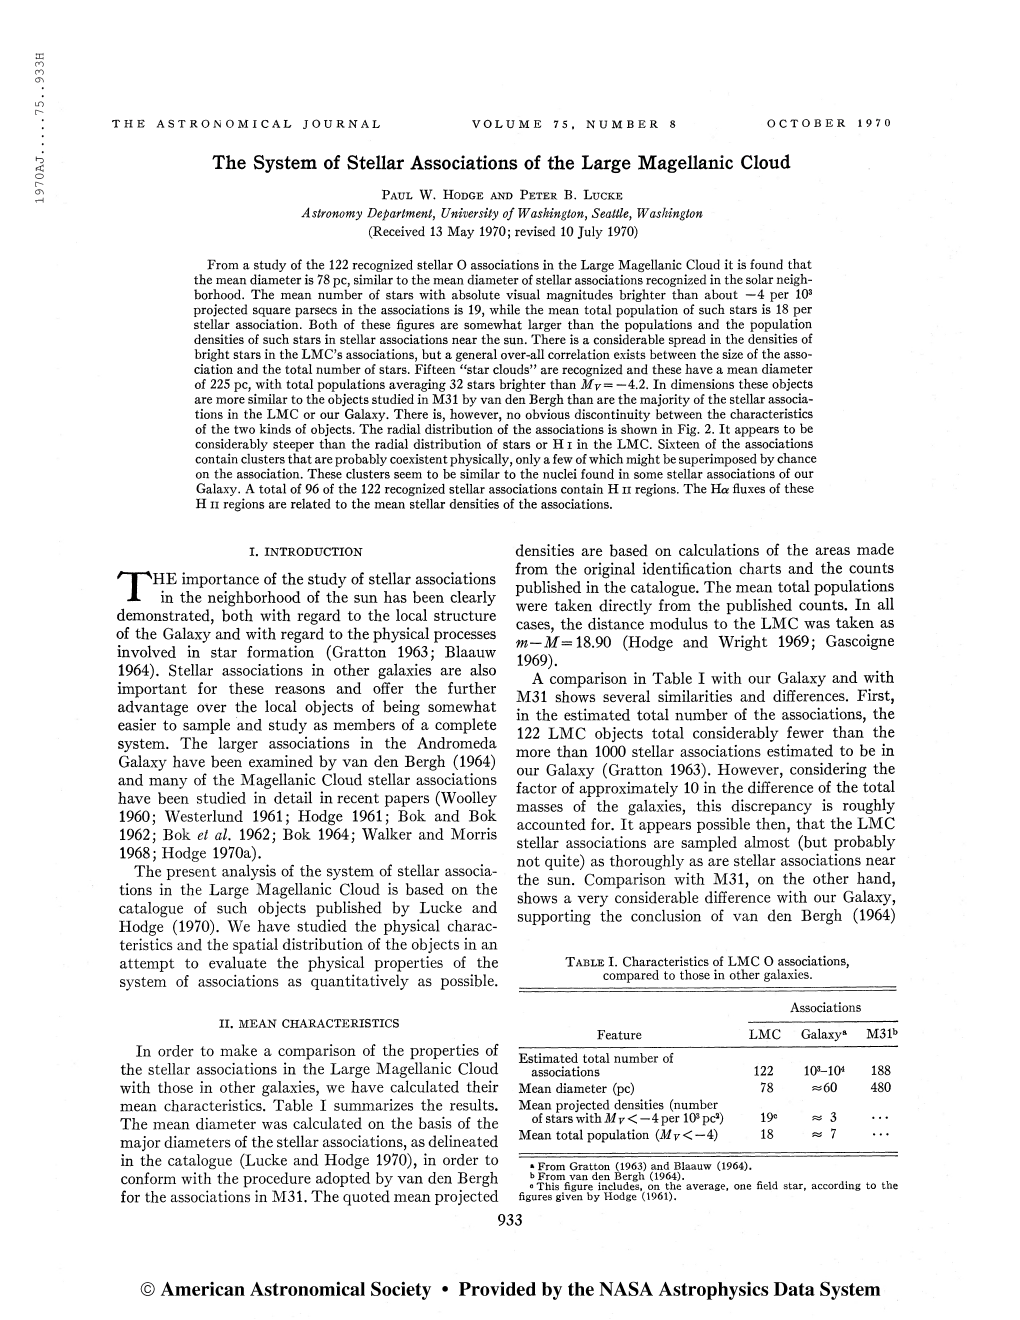 1970Aj 75. . 933H the Astronomical Journal